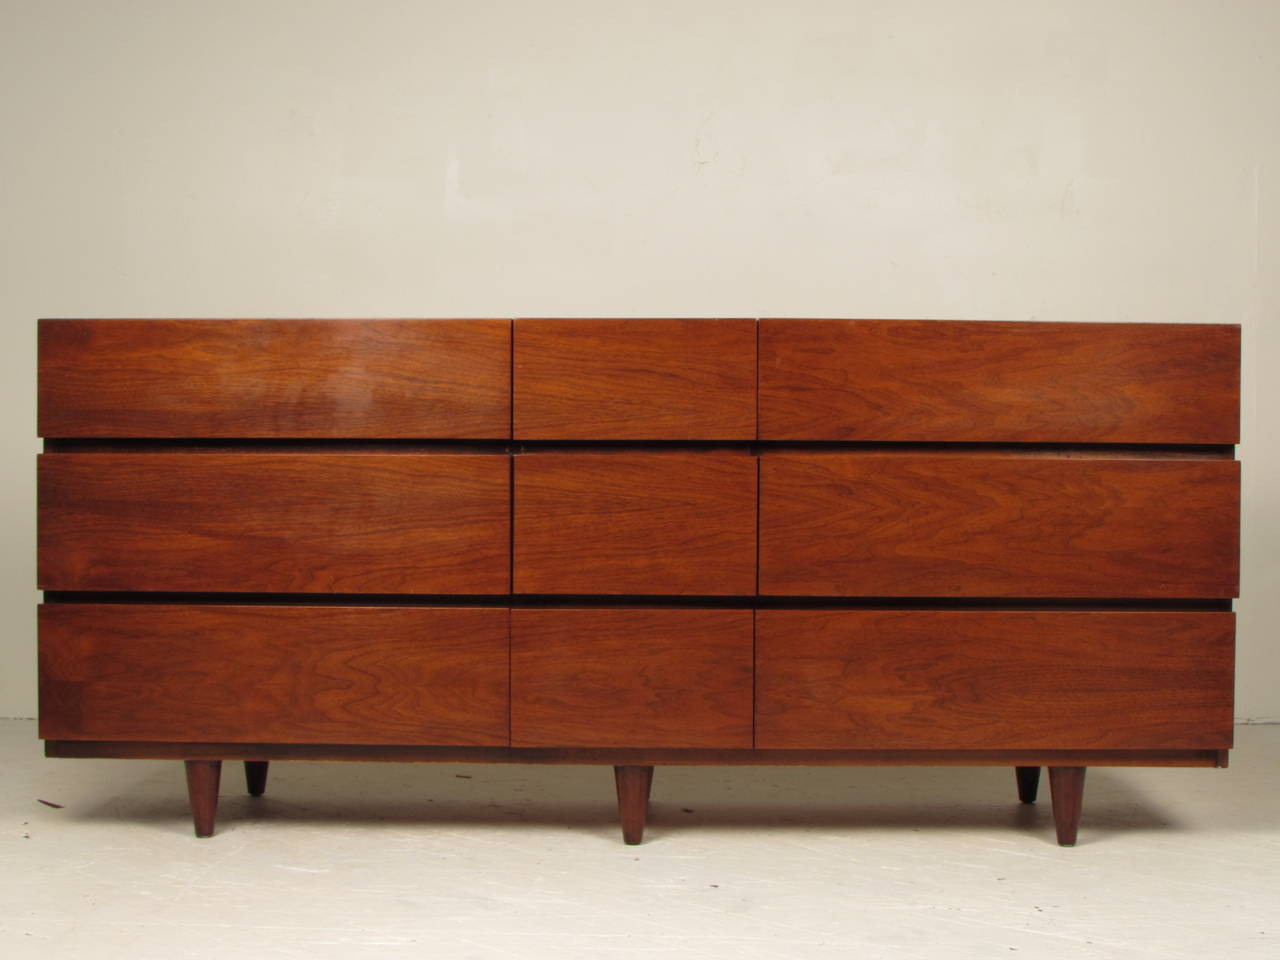 Handsome 9-drawer chest in walnut by American of Martinsville. Exceptional case piece that would work well with nearly any style of interior design. Well crafted and substantial. In excellent vintage condition with gorgeous, glowing original finish.